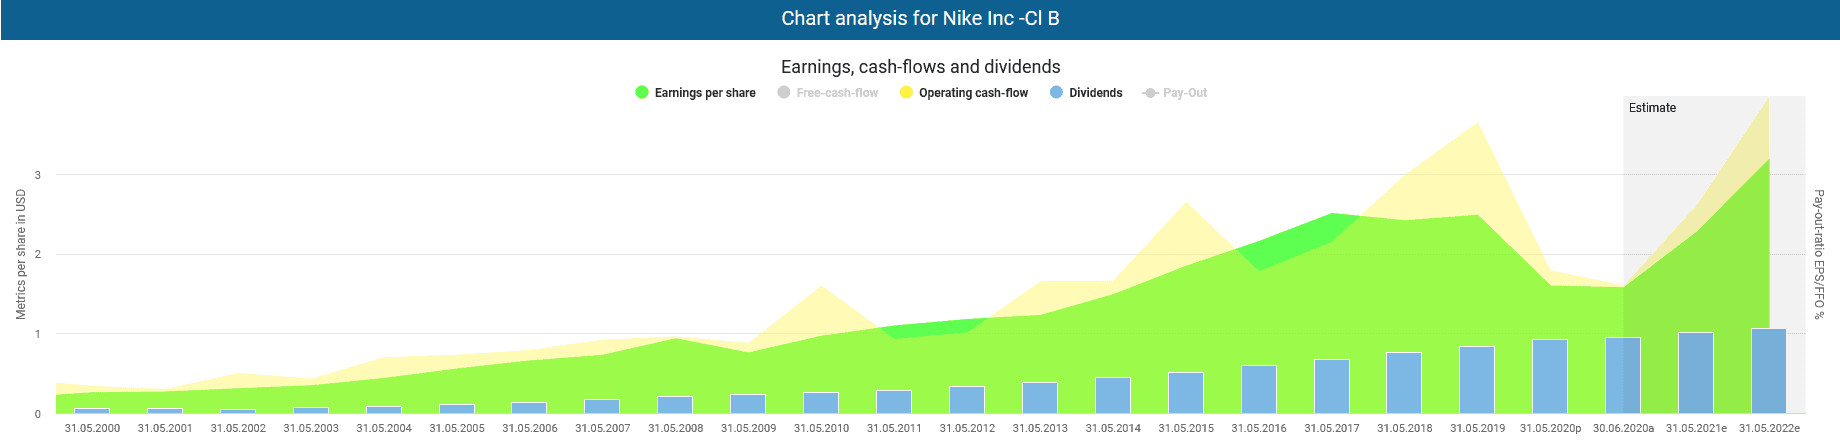 camera straffen afwijzing Nike stock: Is there more room to run upwards?